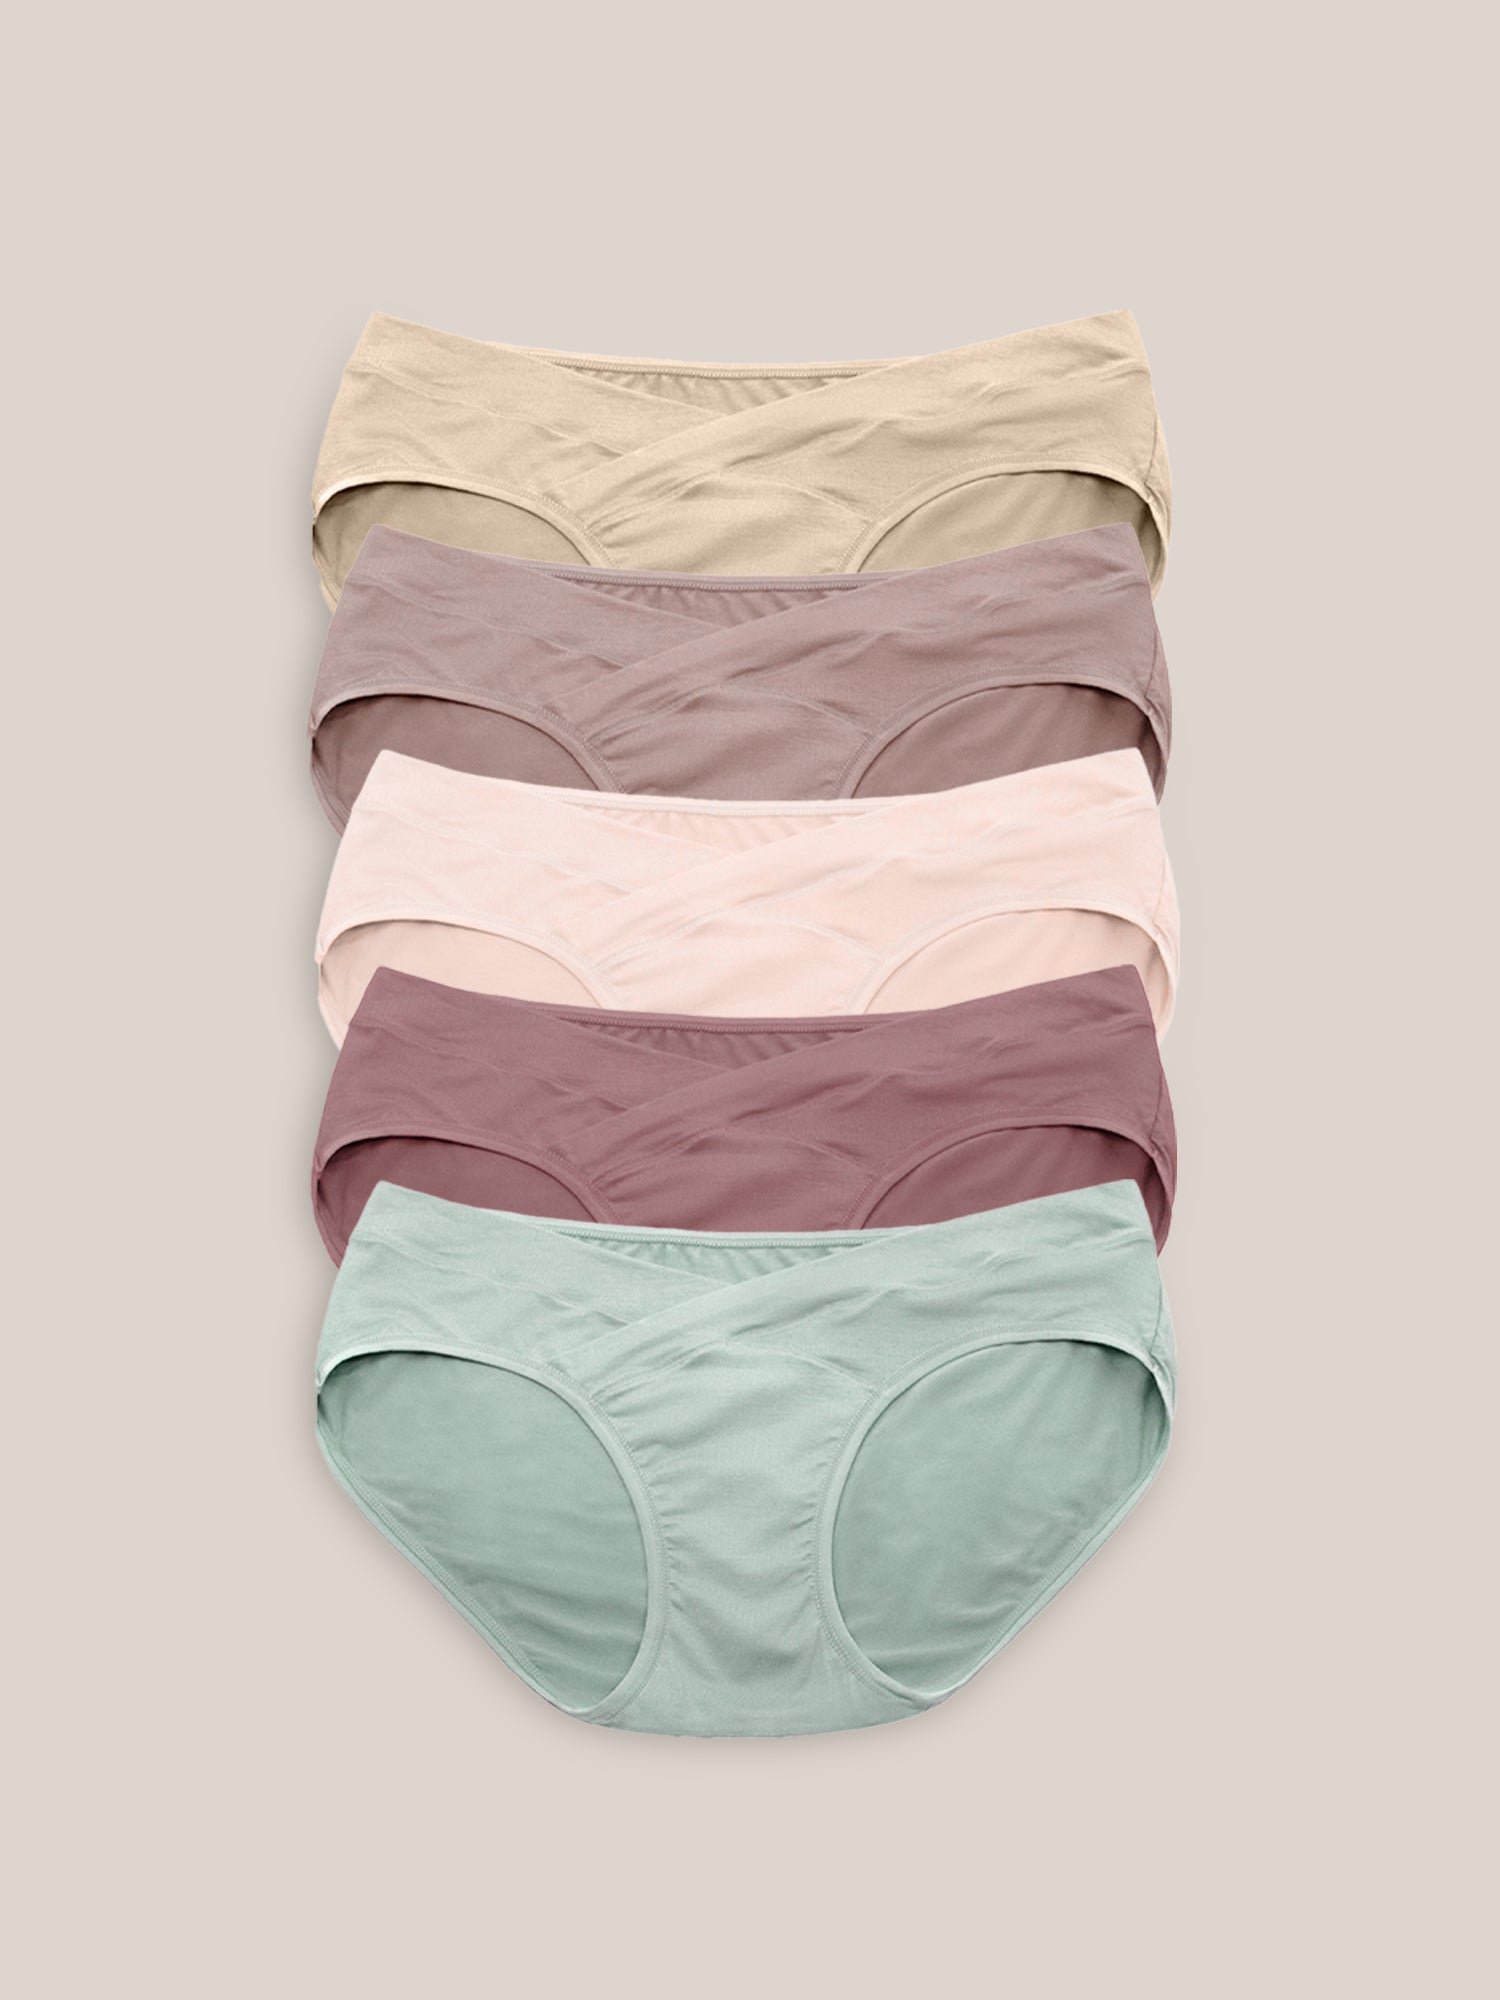 Kindred Bravely Grow With Me Maternity + Postpartum Briefs - Light Pink M :  Target